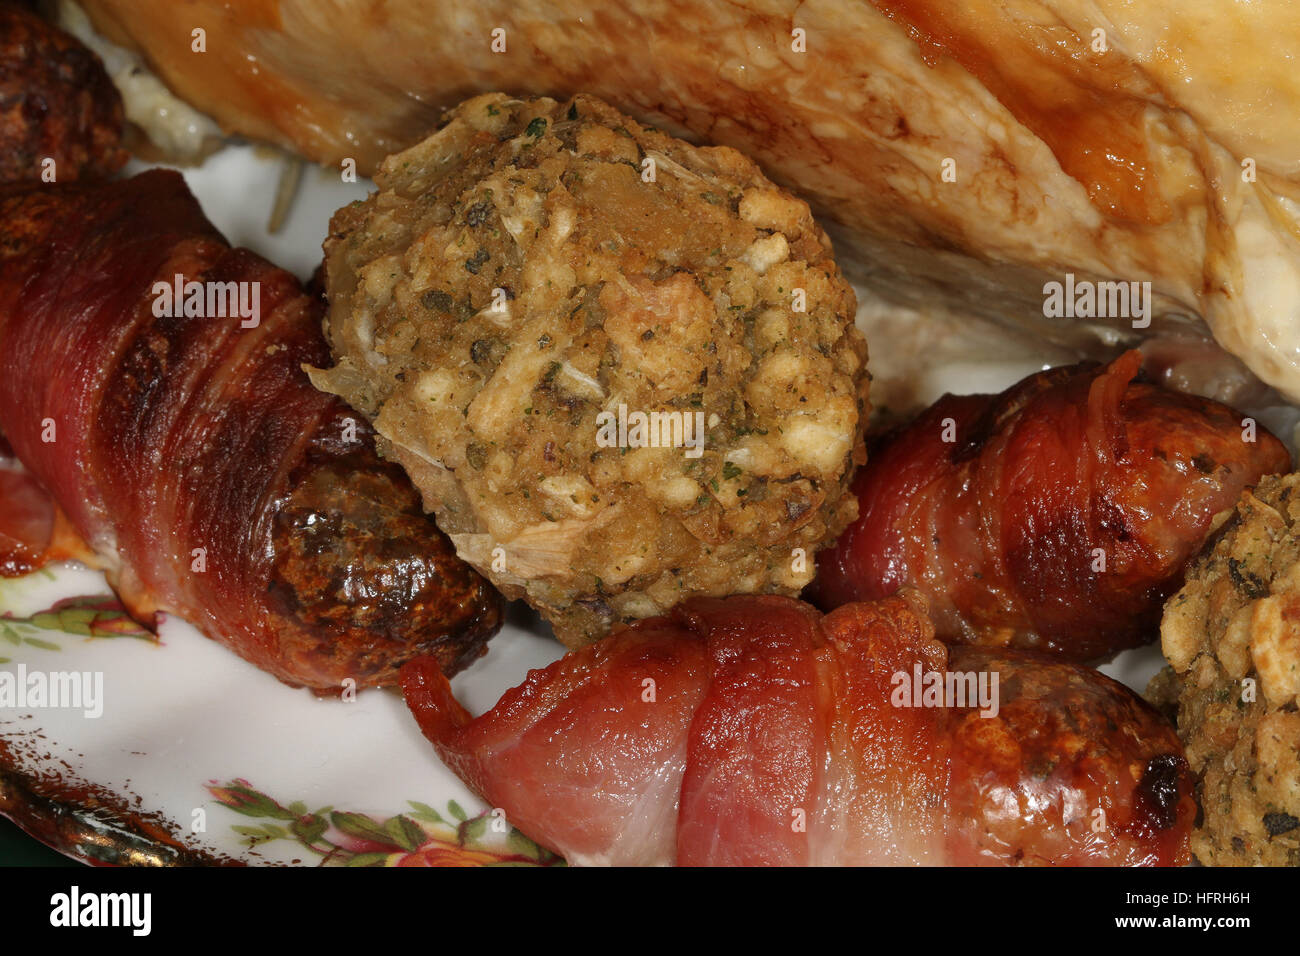 Sausages, bacon and stuffing. Christmas fare in the kitchen. Stock Photo